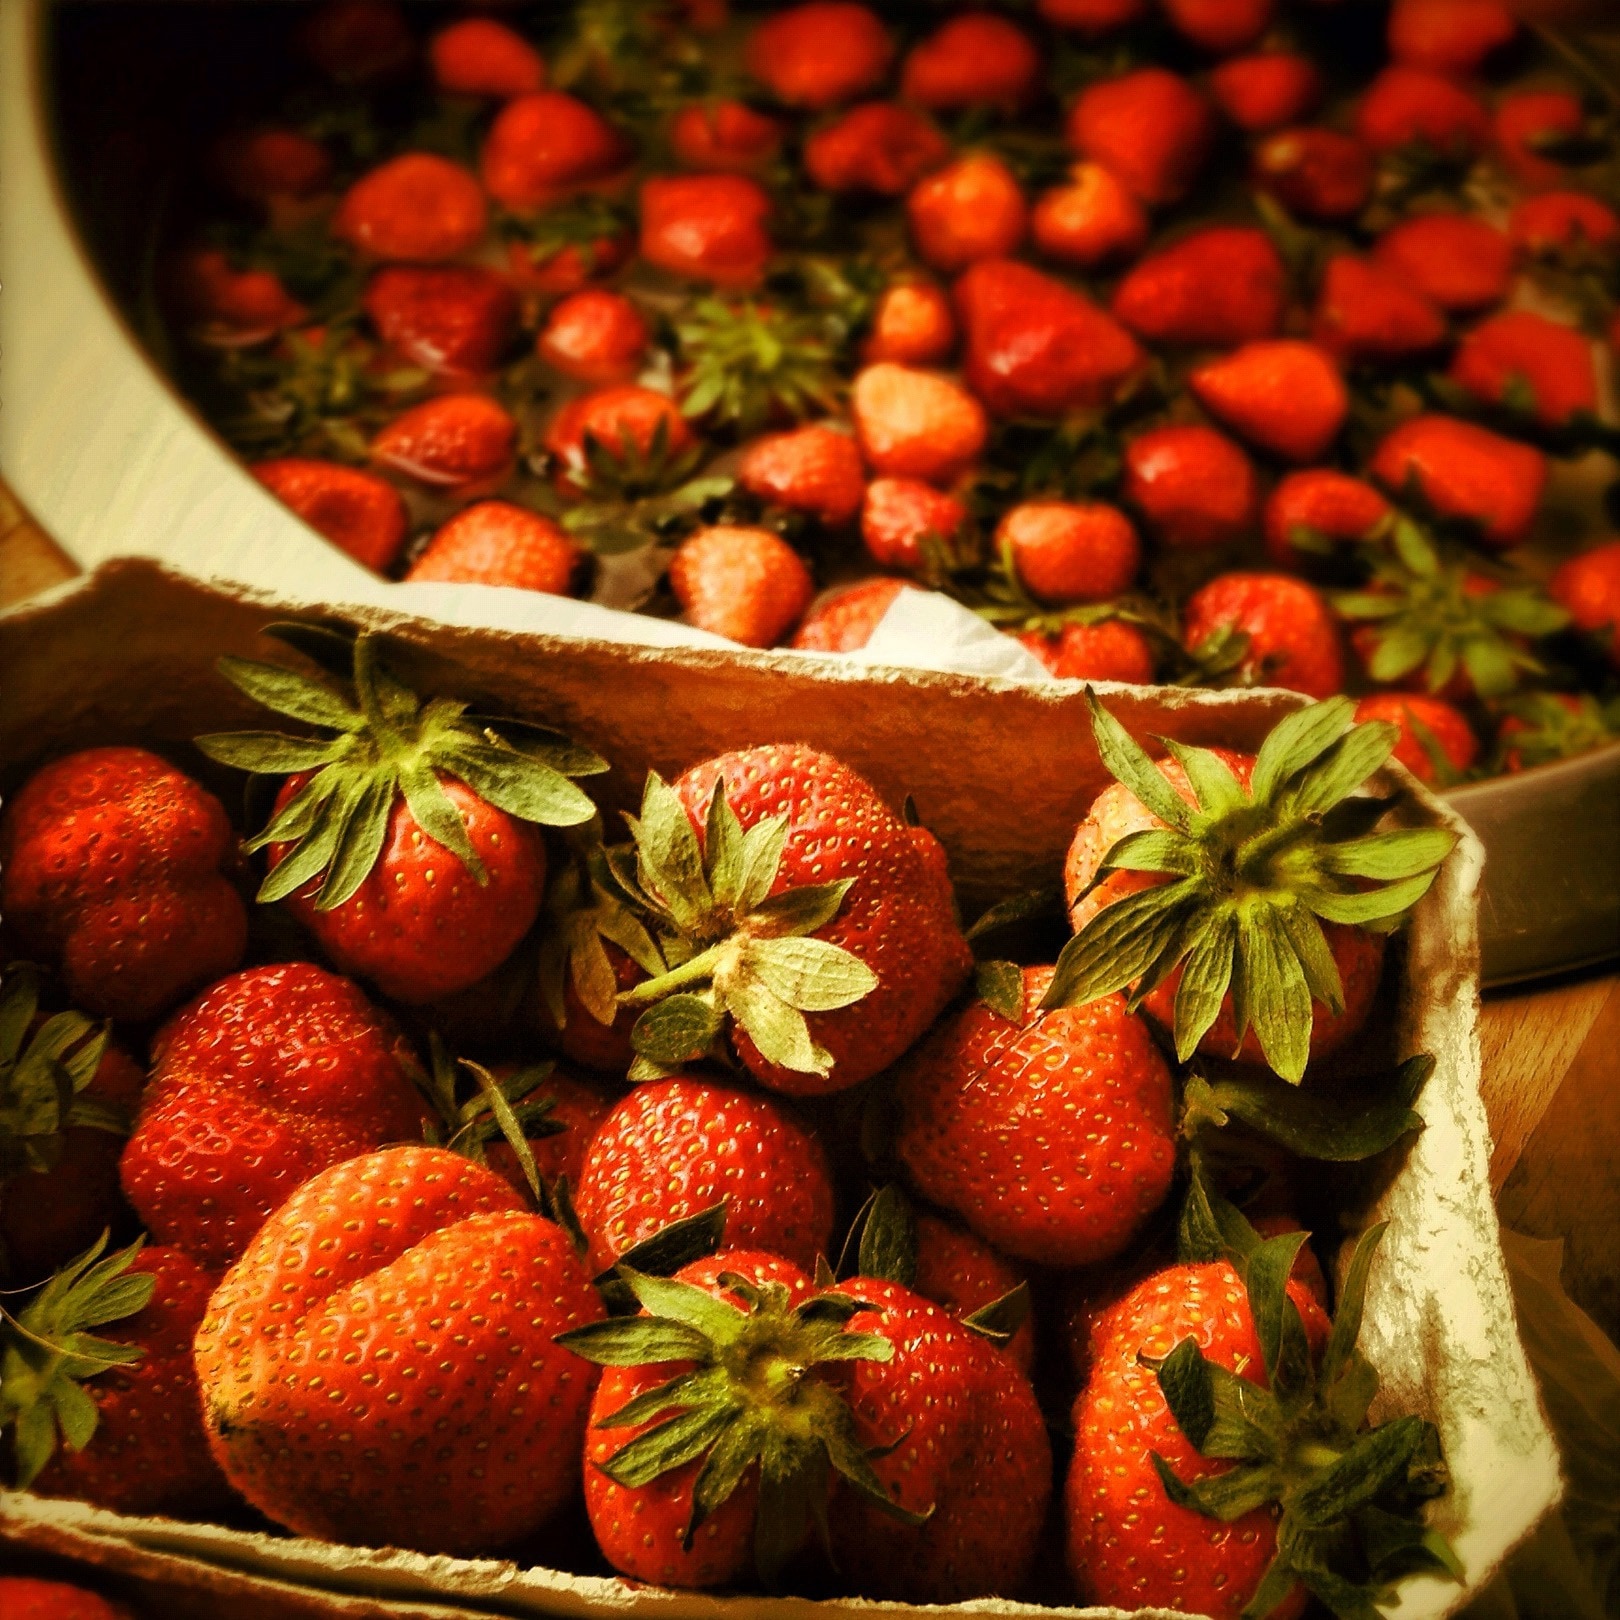 strawberry in boxes